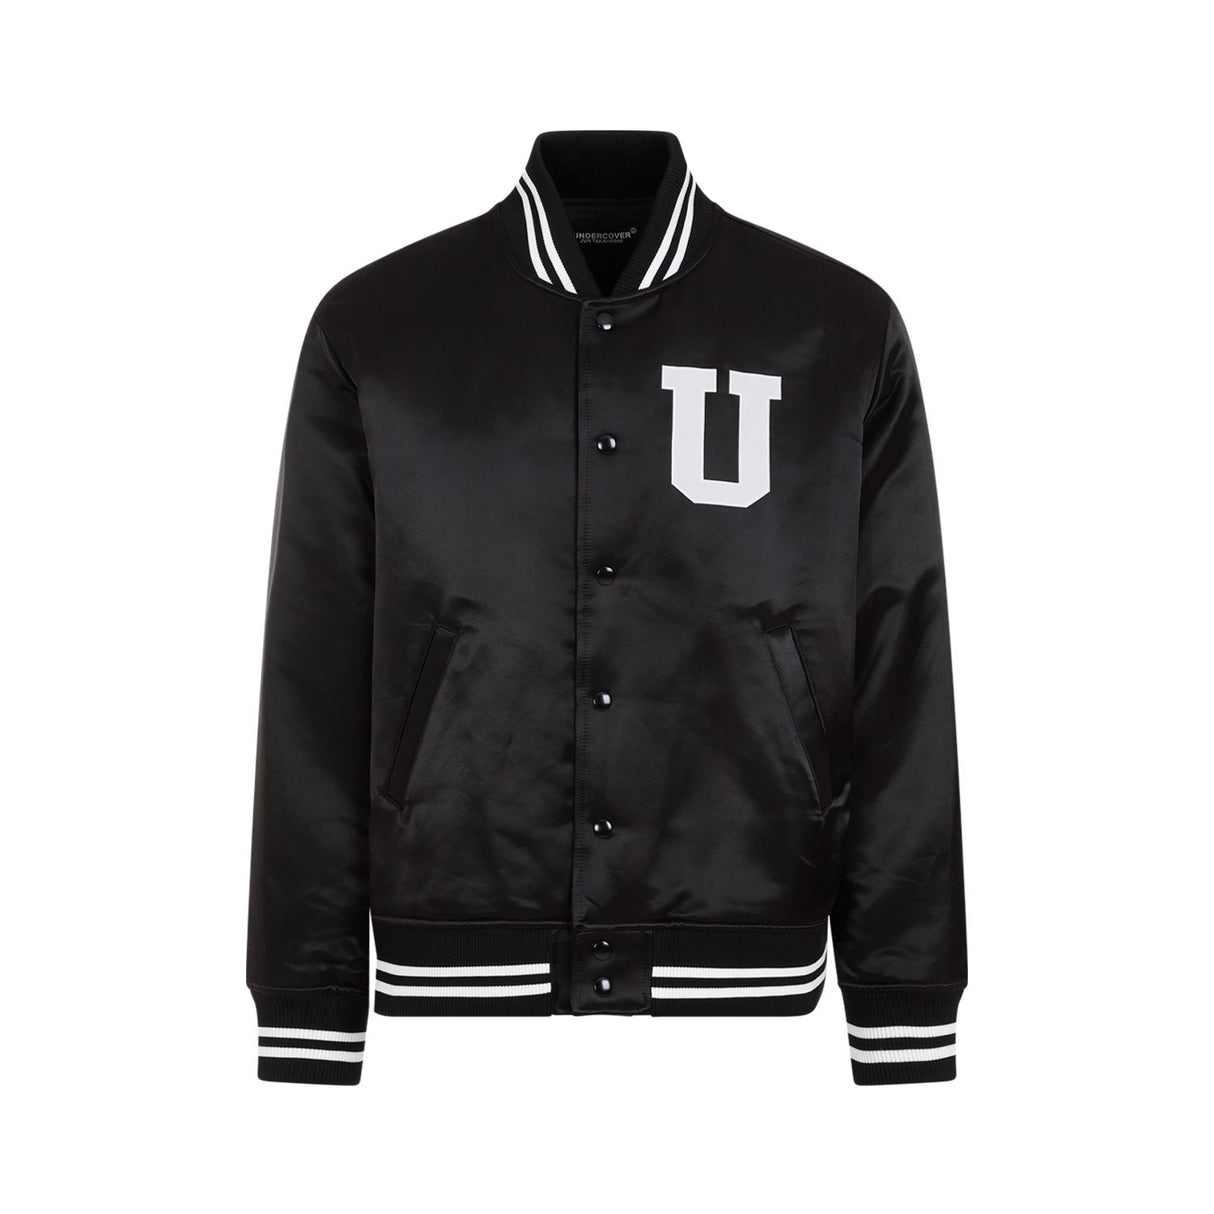 UNDERCOVER Black Cotton Bomber Jacket for Men - FW23 Collection